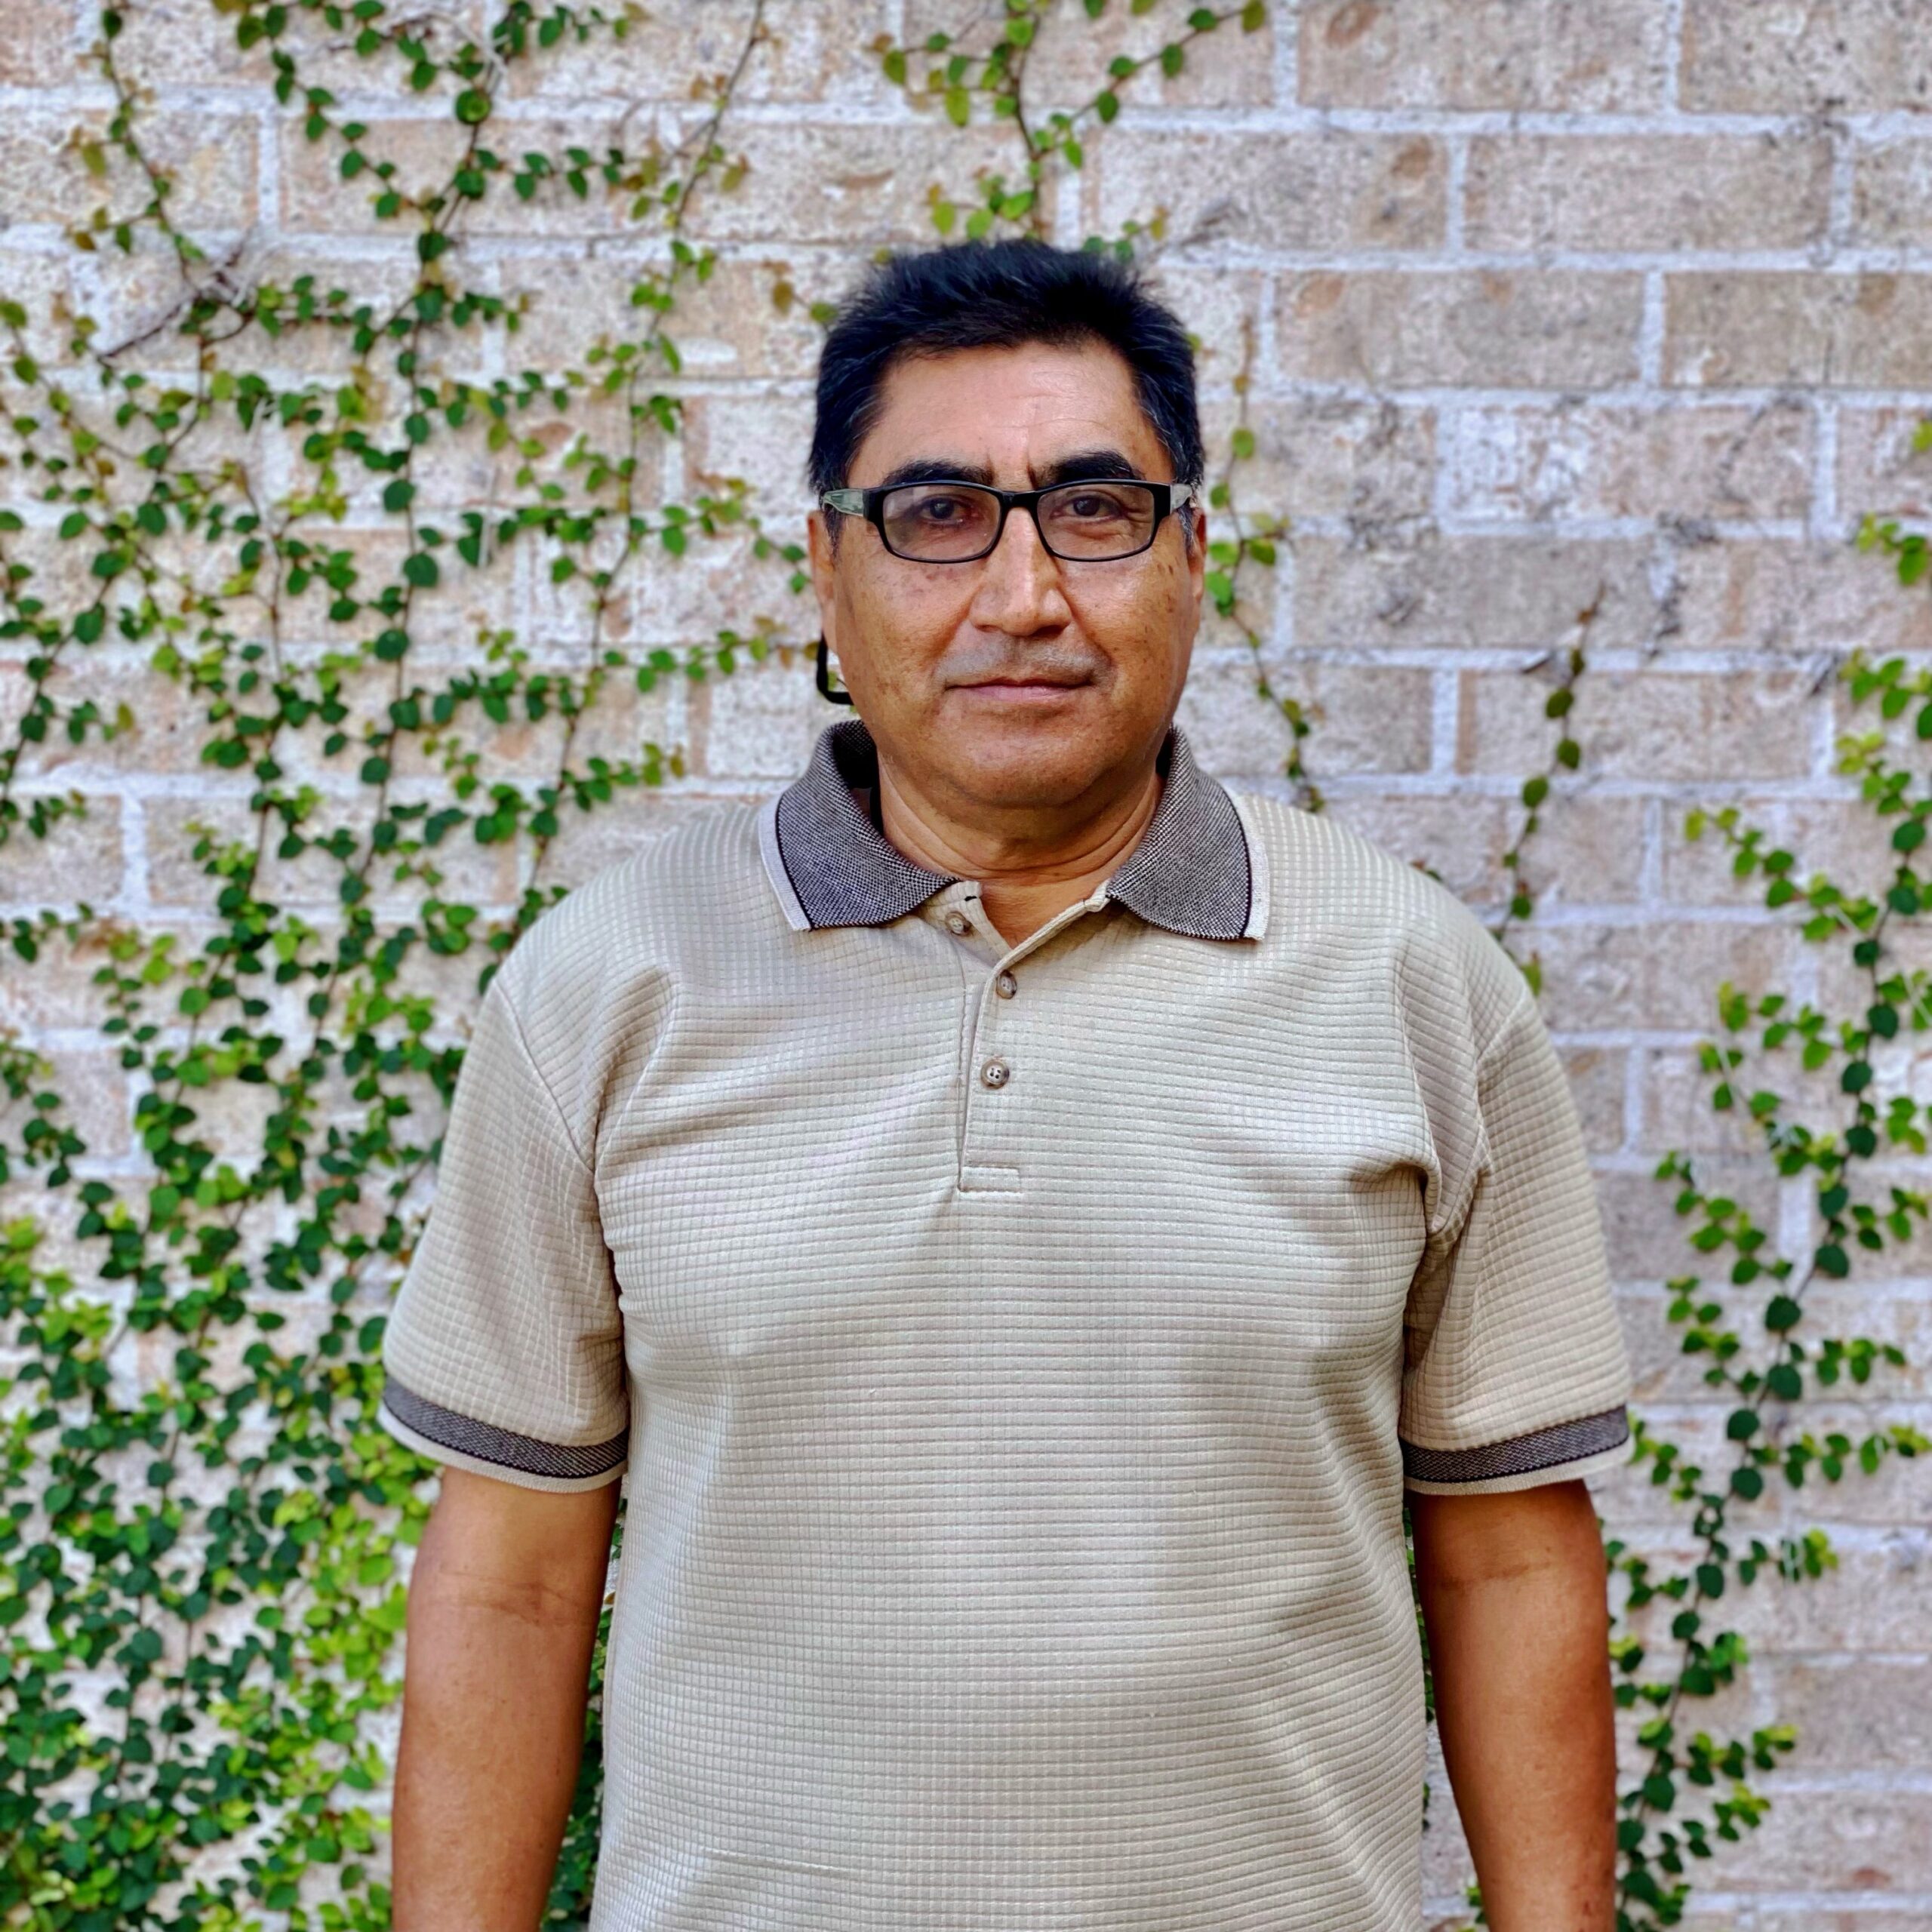 Headshot of serious Latino man in a tan polo shirt against a brick background